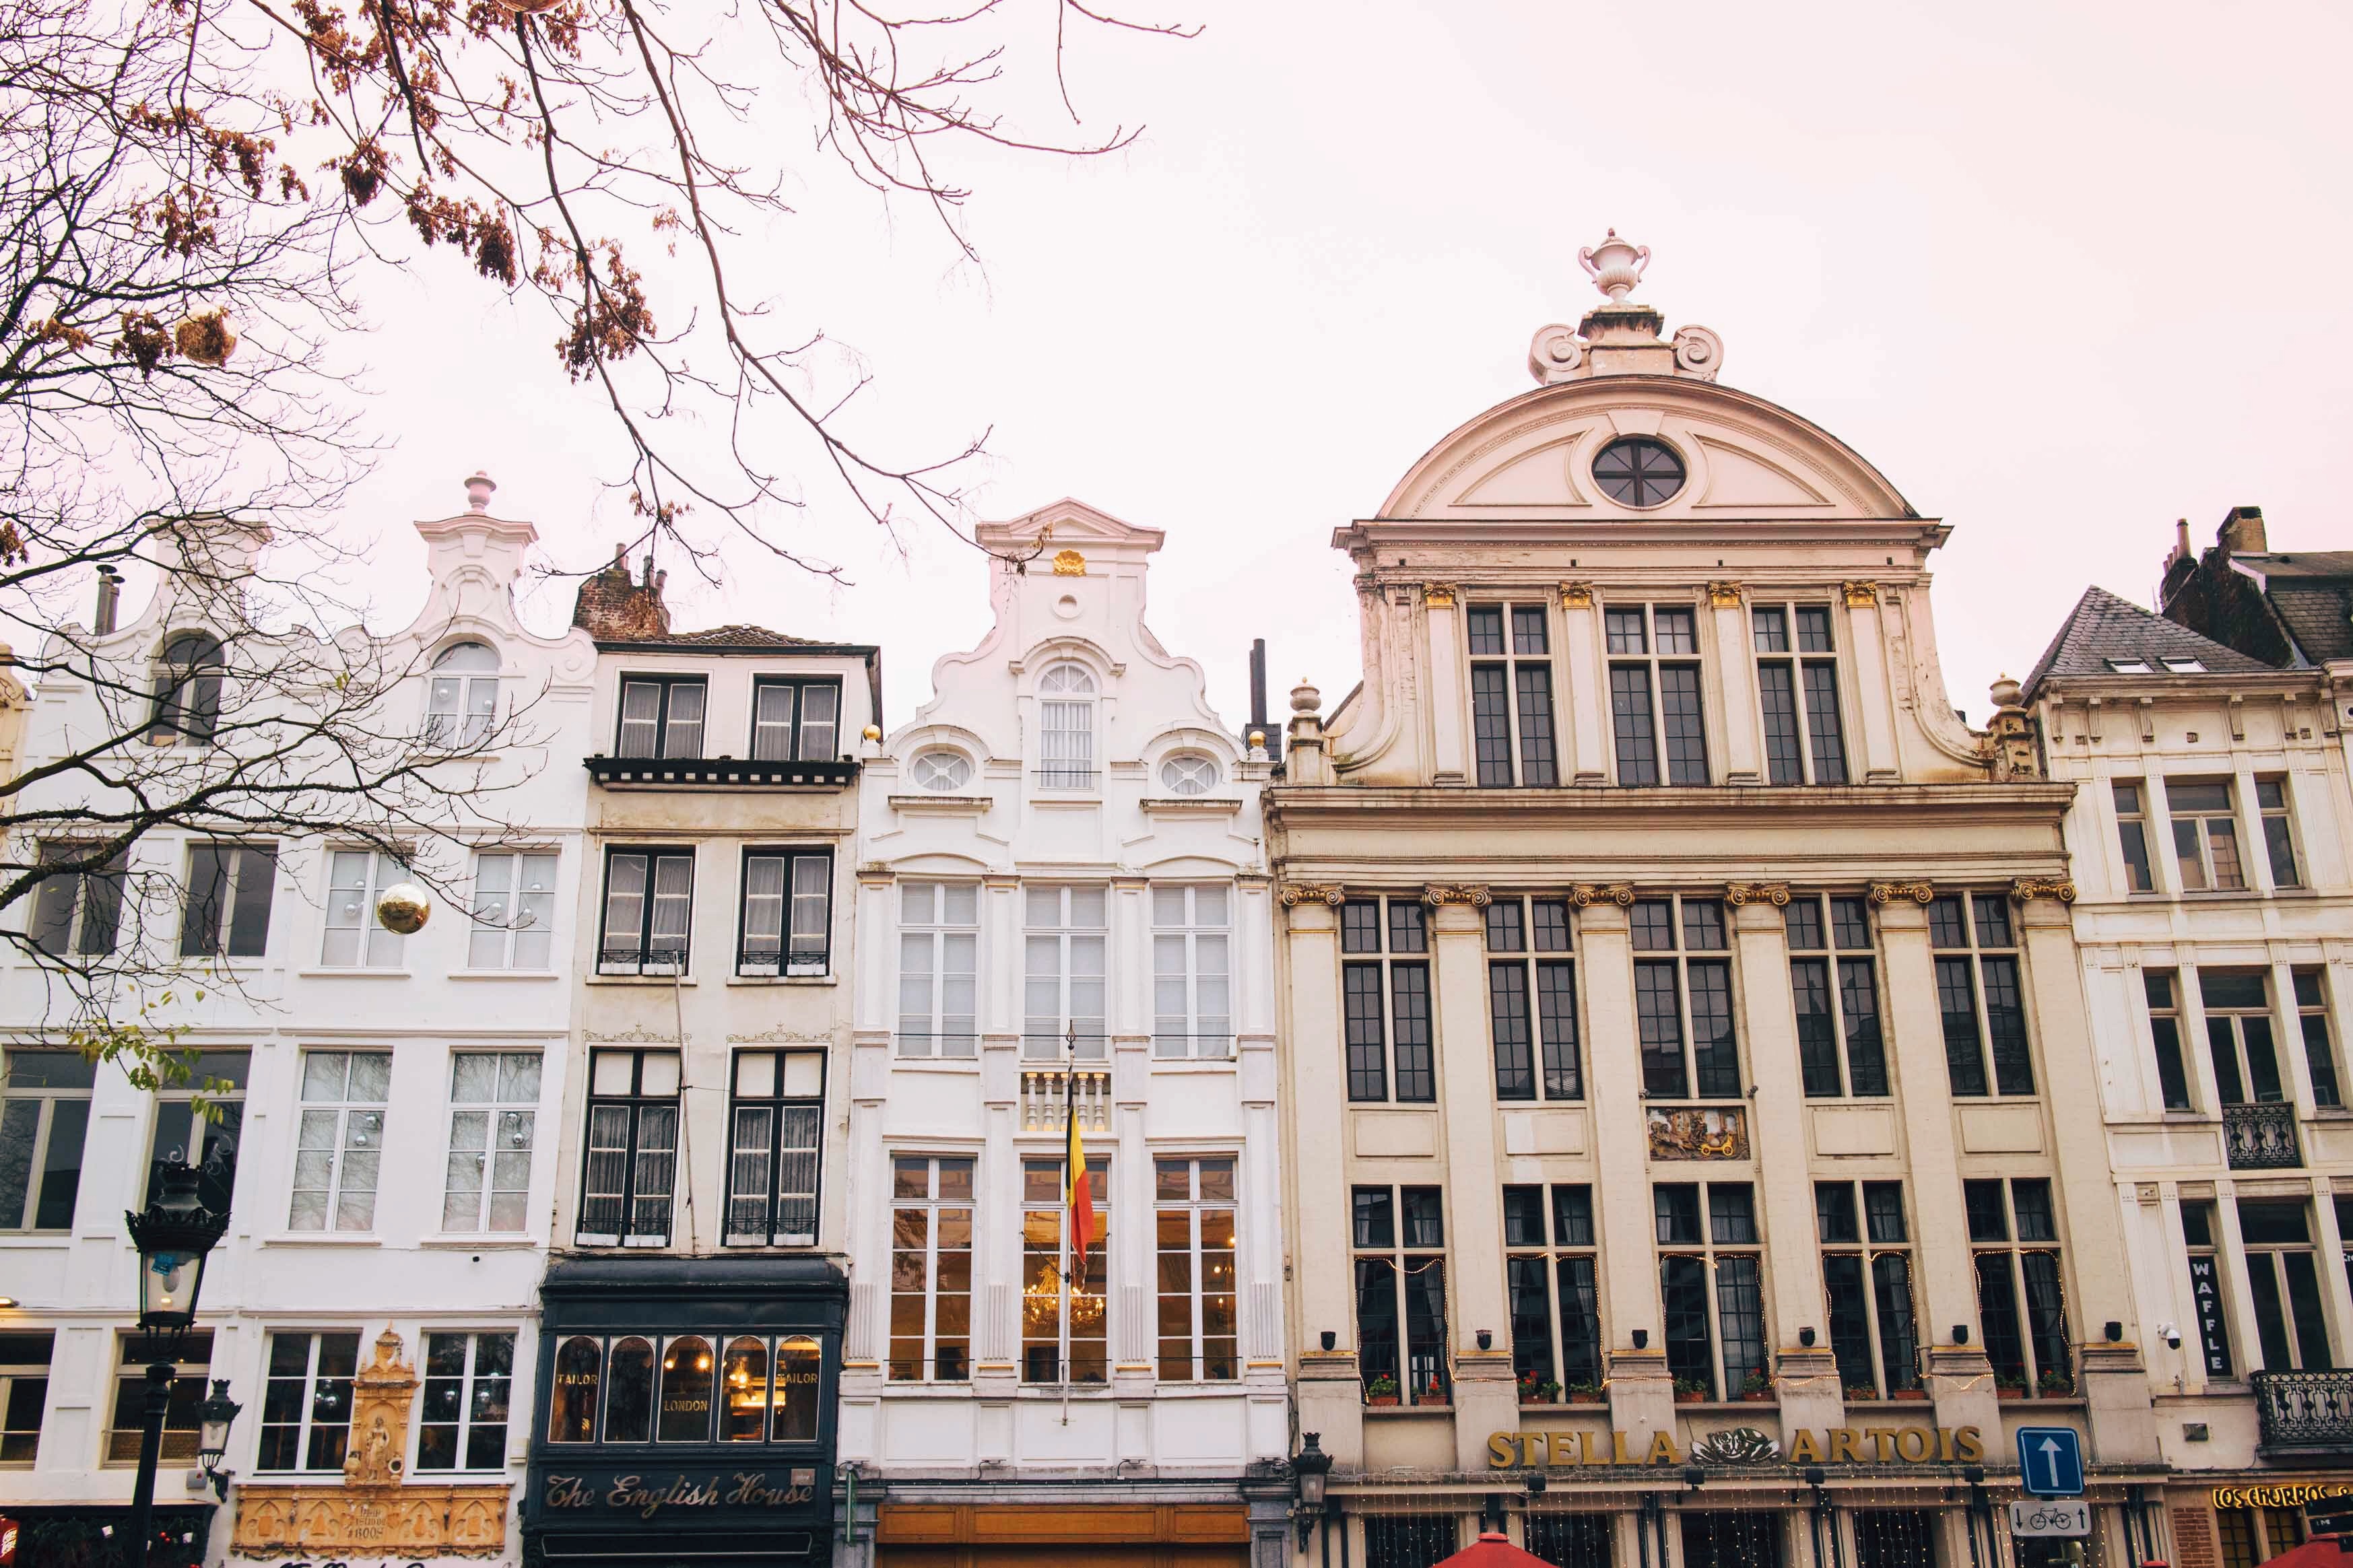 Winter wonder in Brussels | Souvenirs gift guide and more